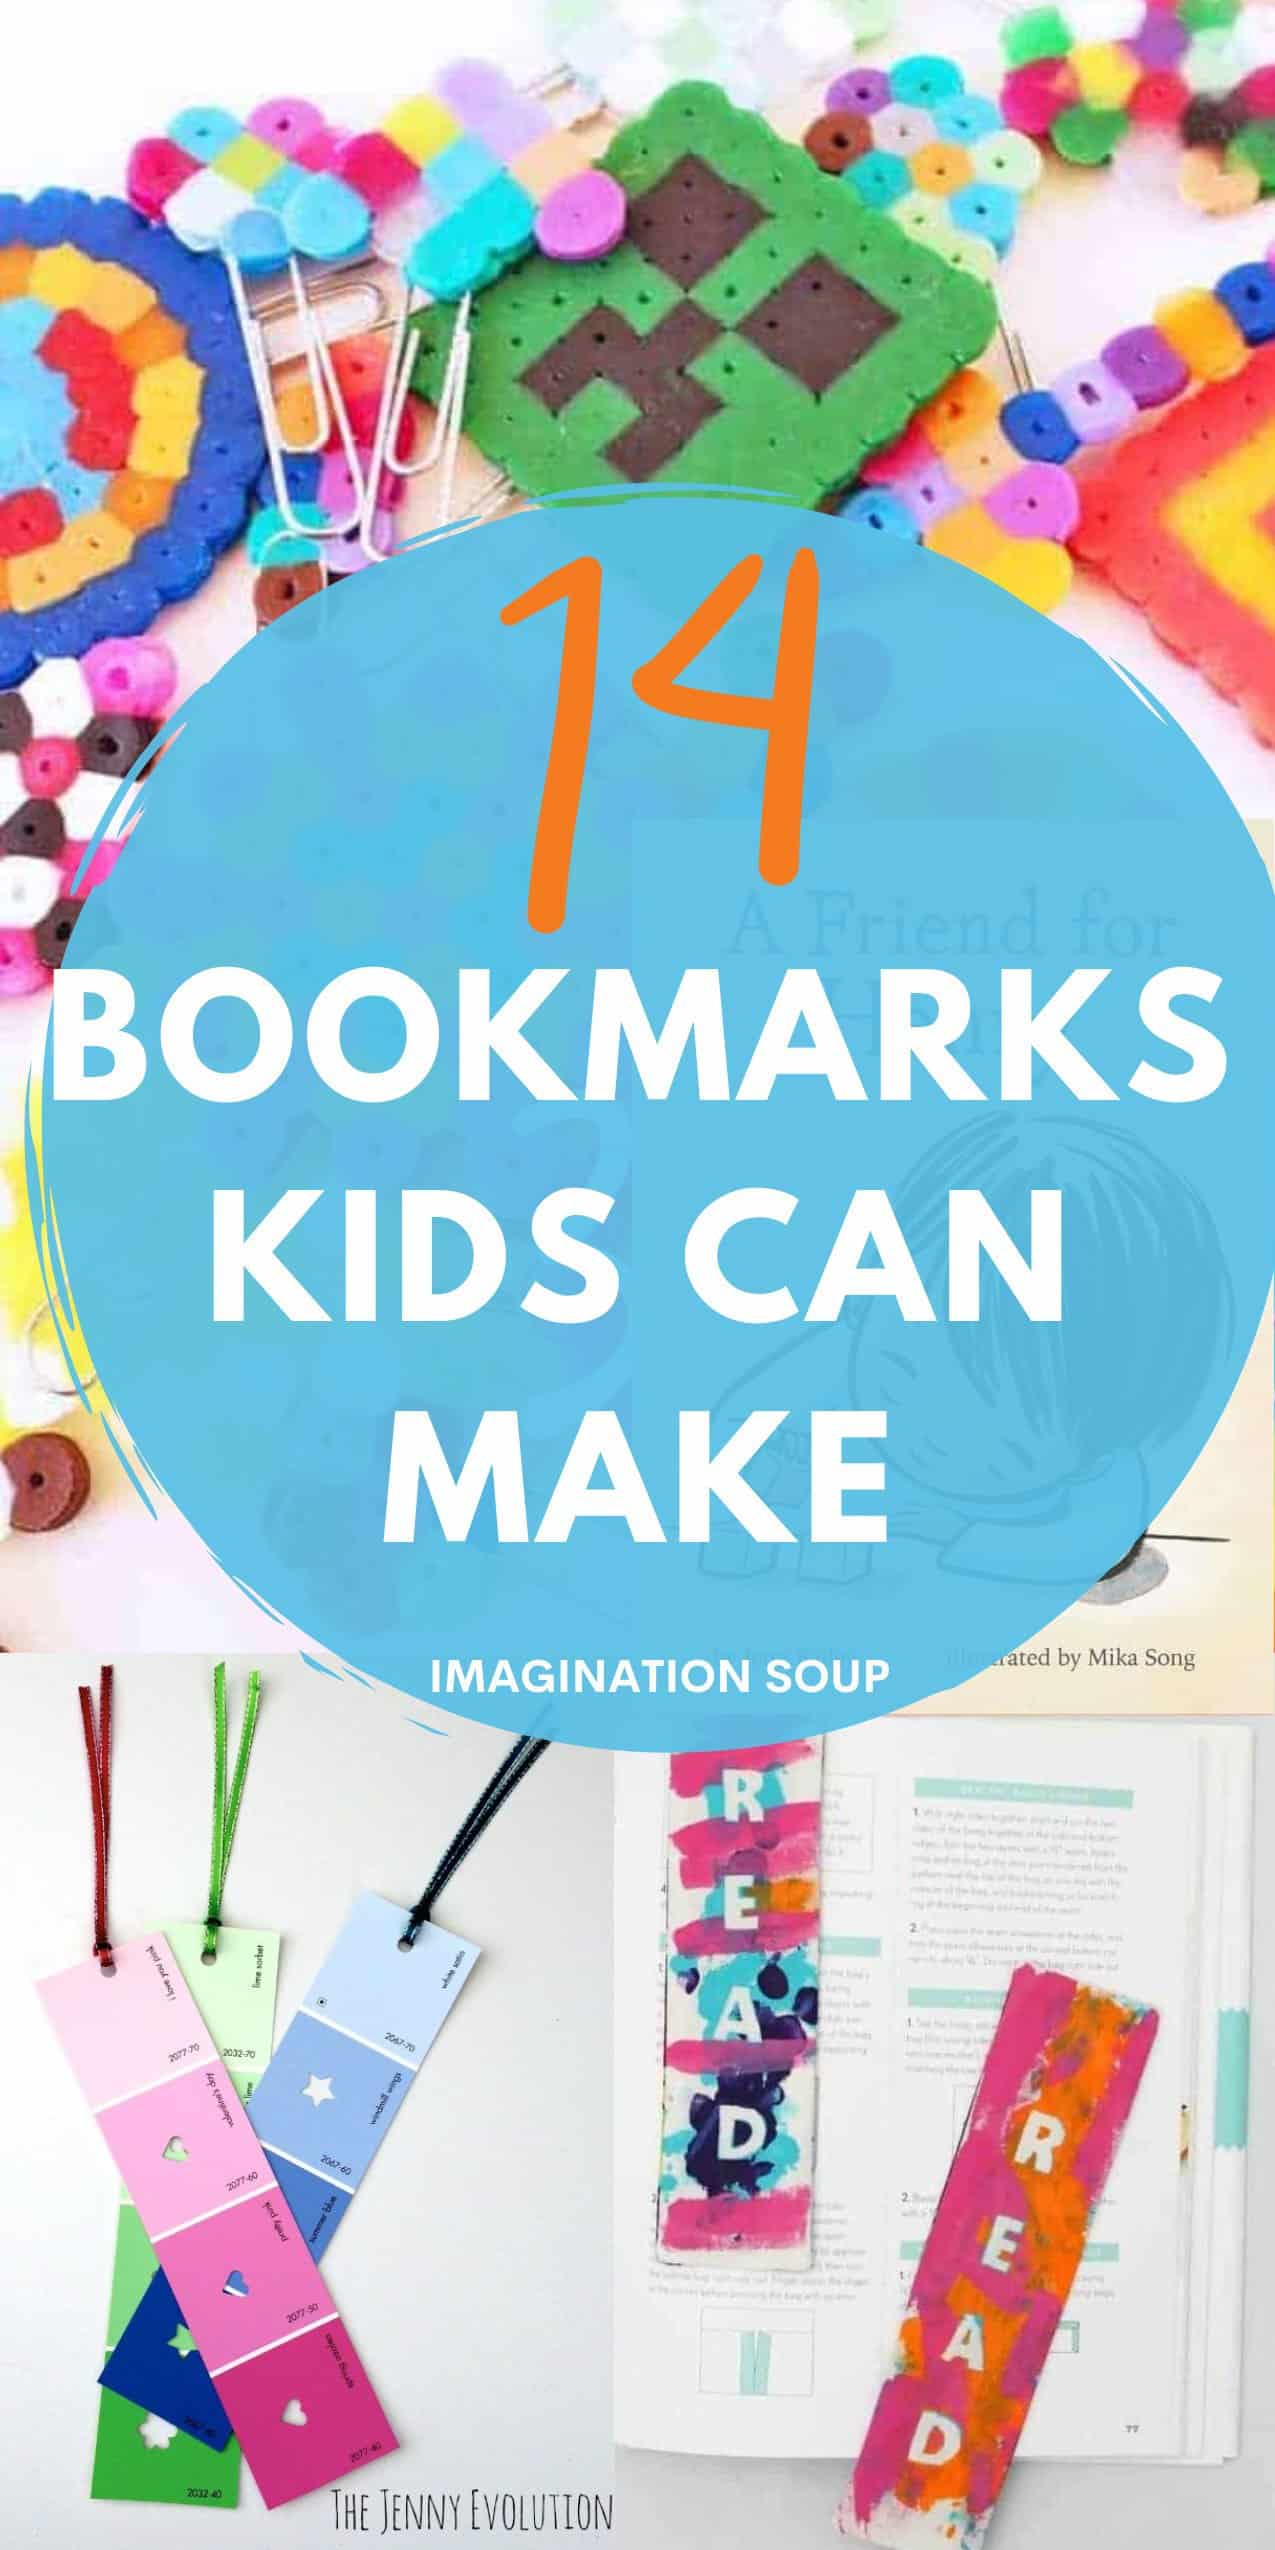 BOOKMARKS KIDS CAN MAKE
